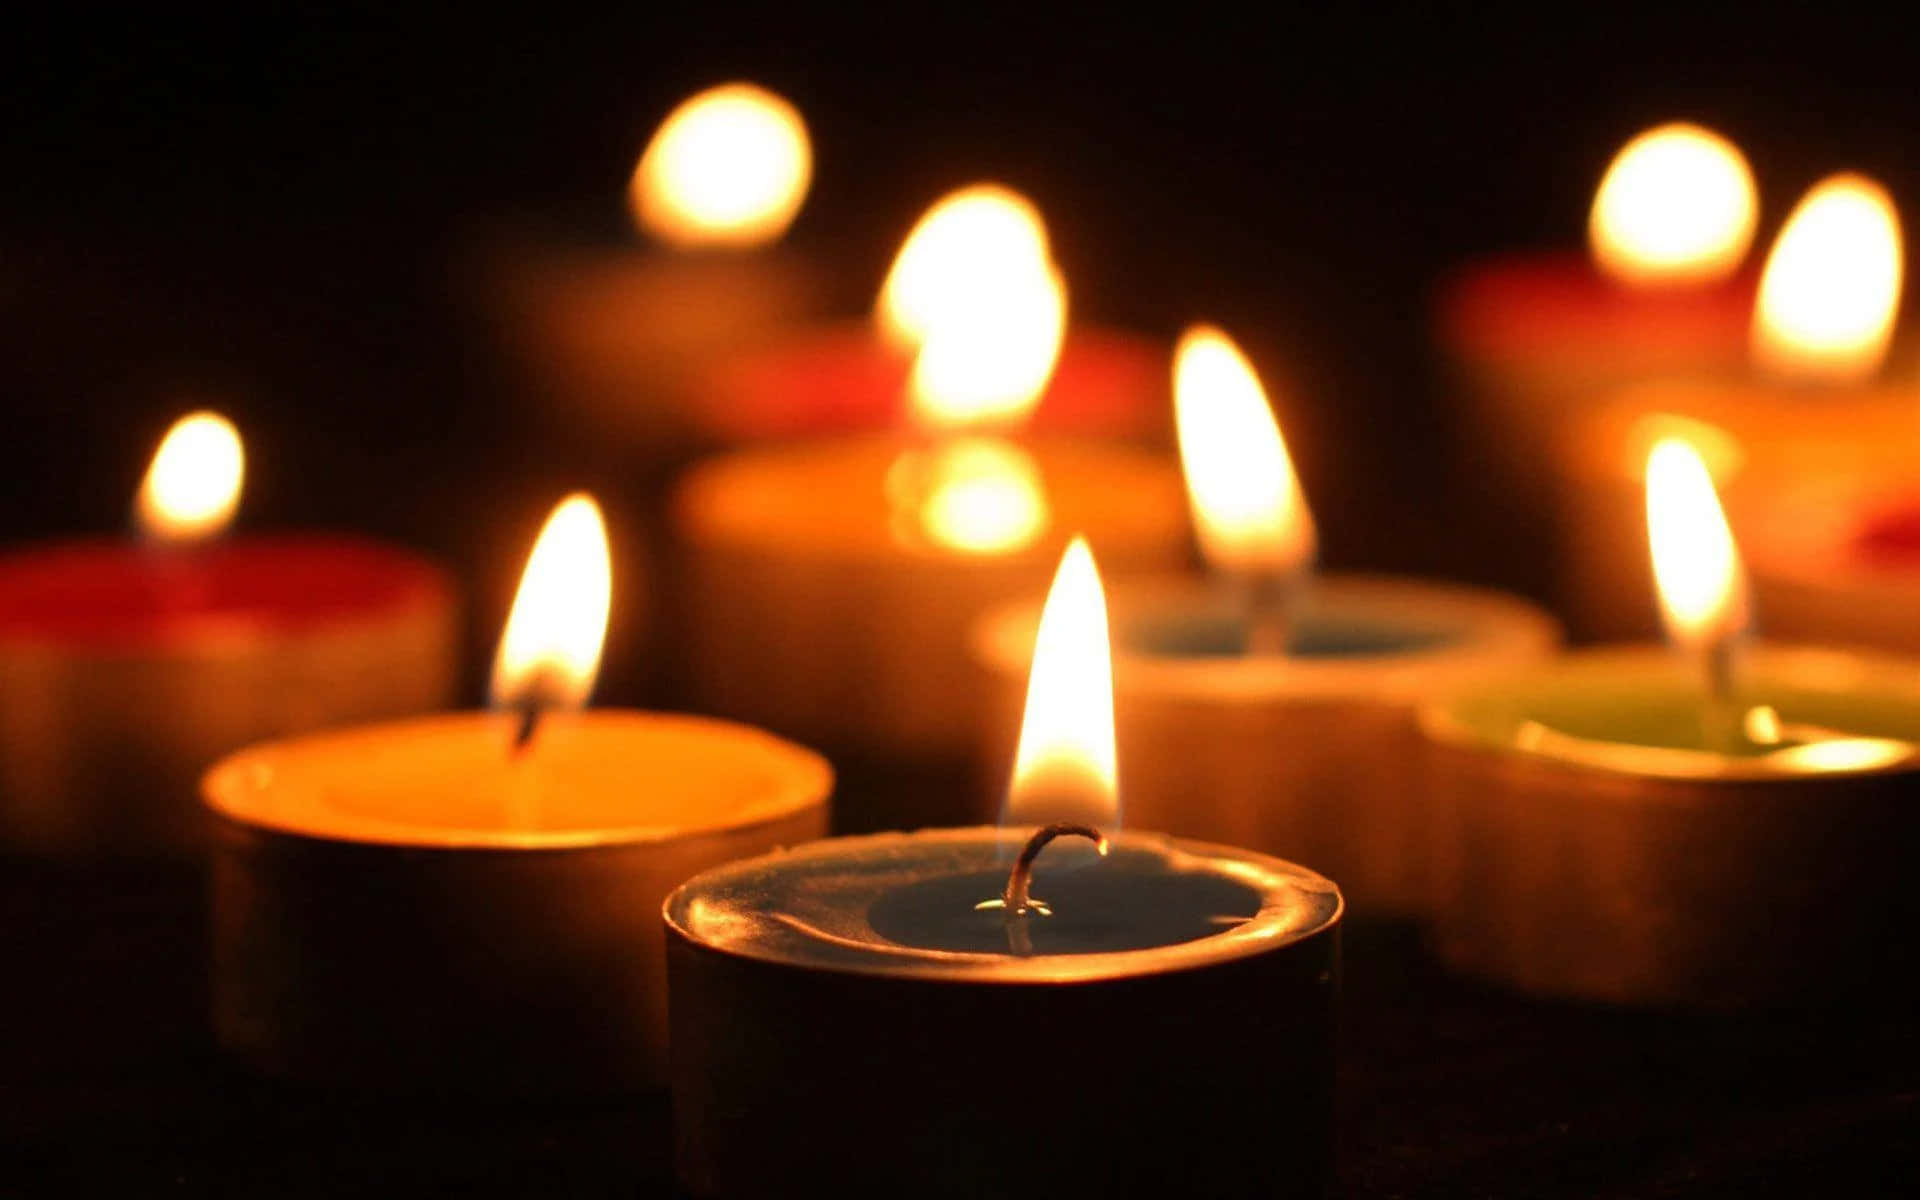 All Souls’ Day Memorial Candle Lights Wallpaper